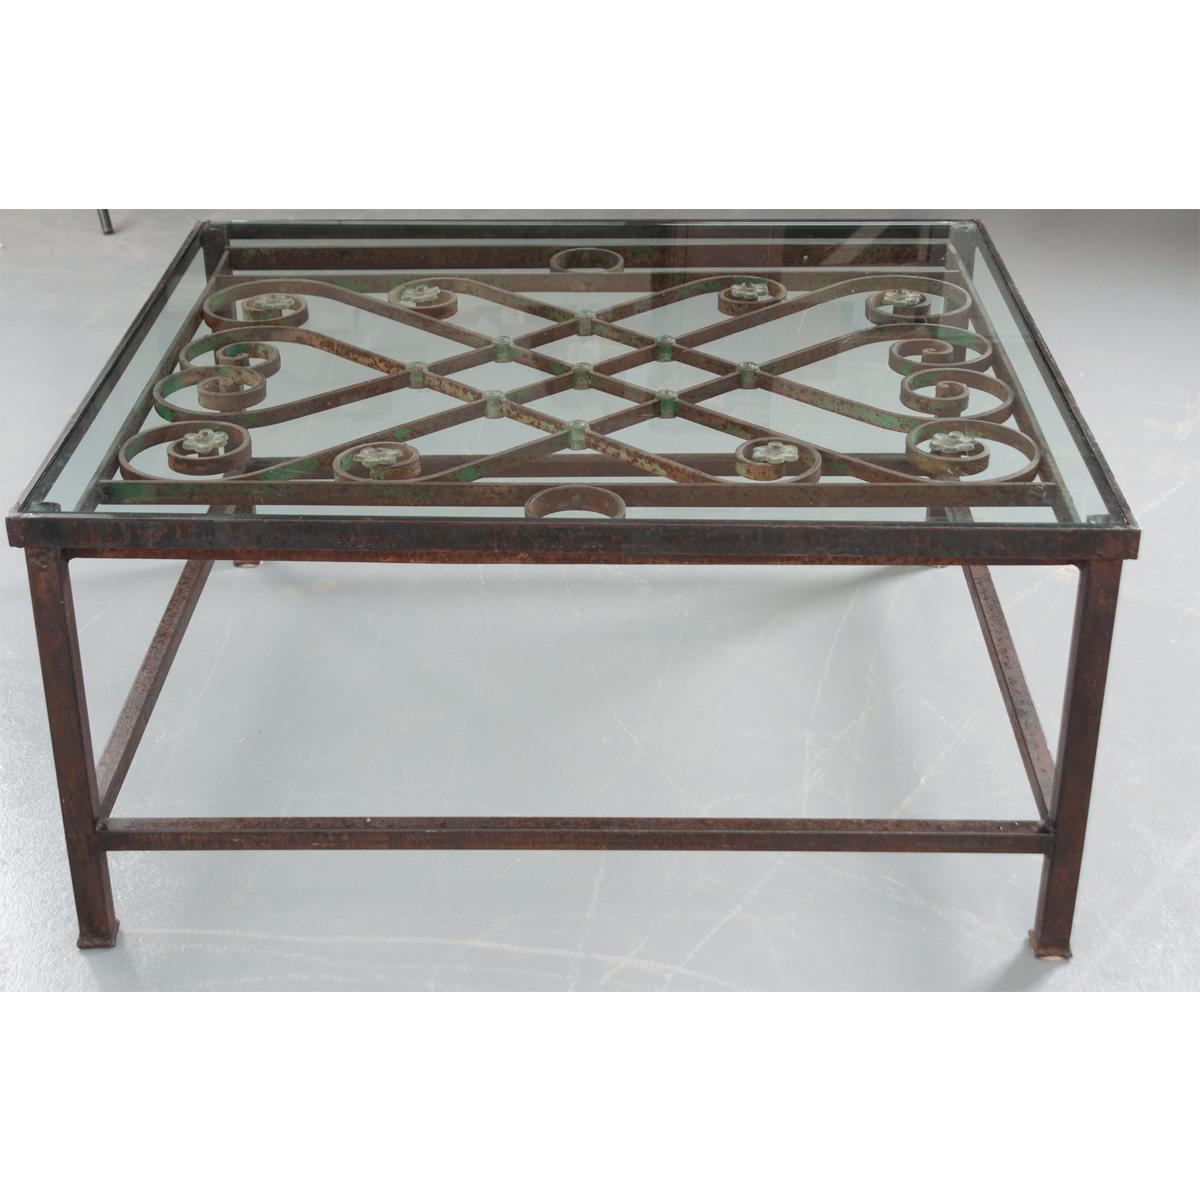 Other French Antique Iron Architectural Fragment and Glass Coffee Table For Sale